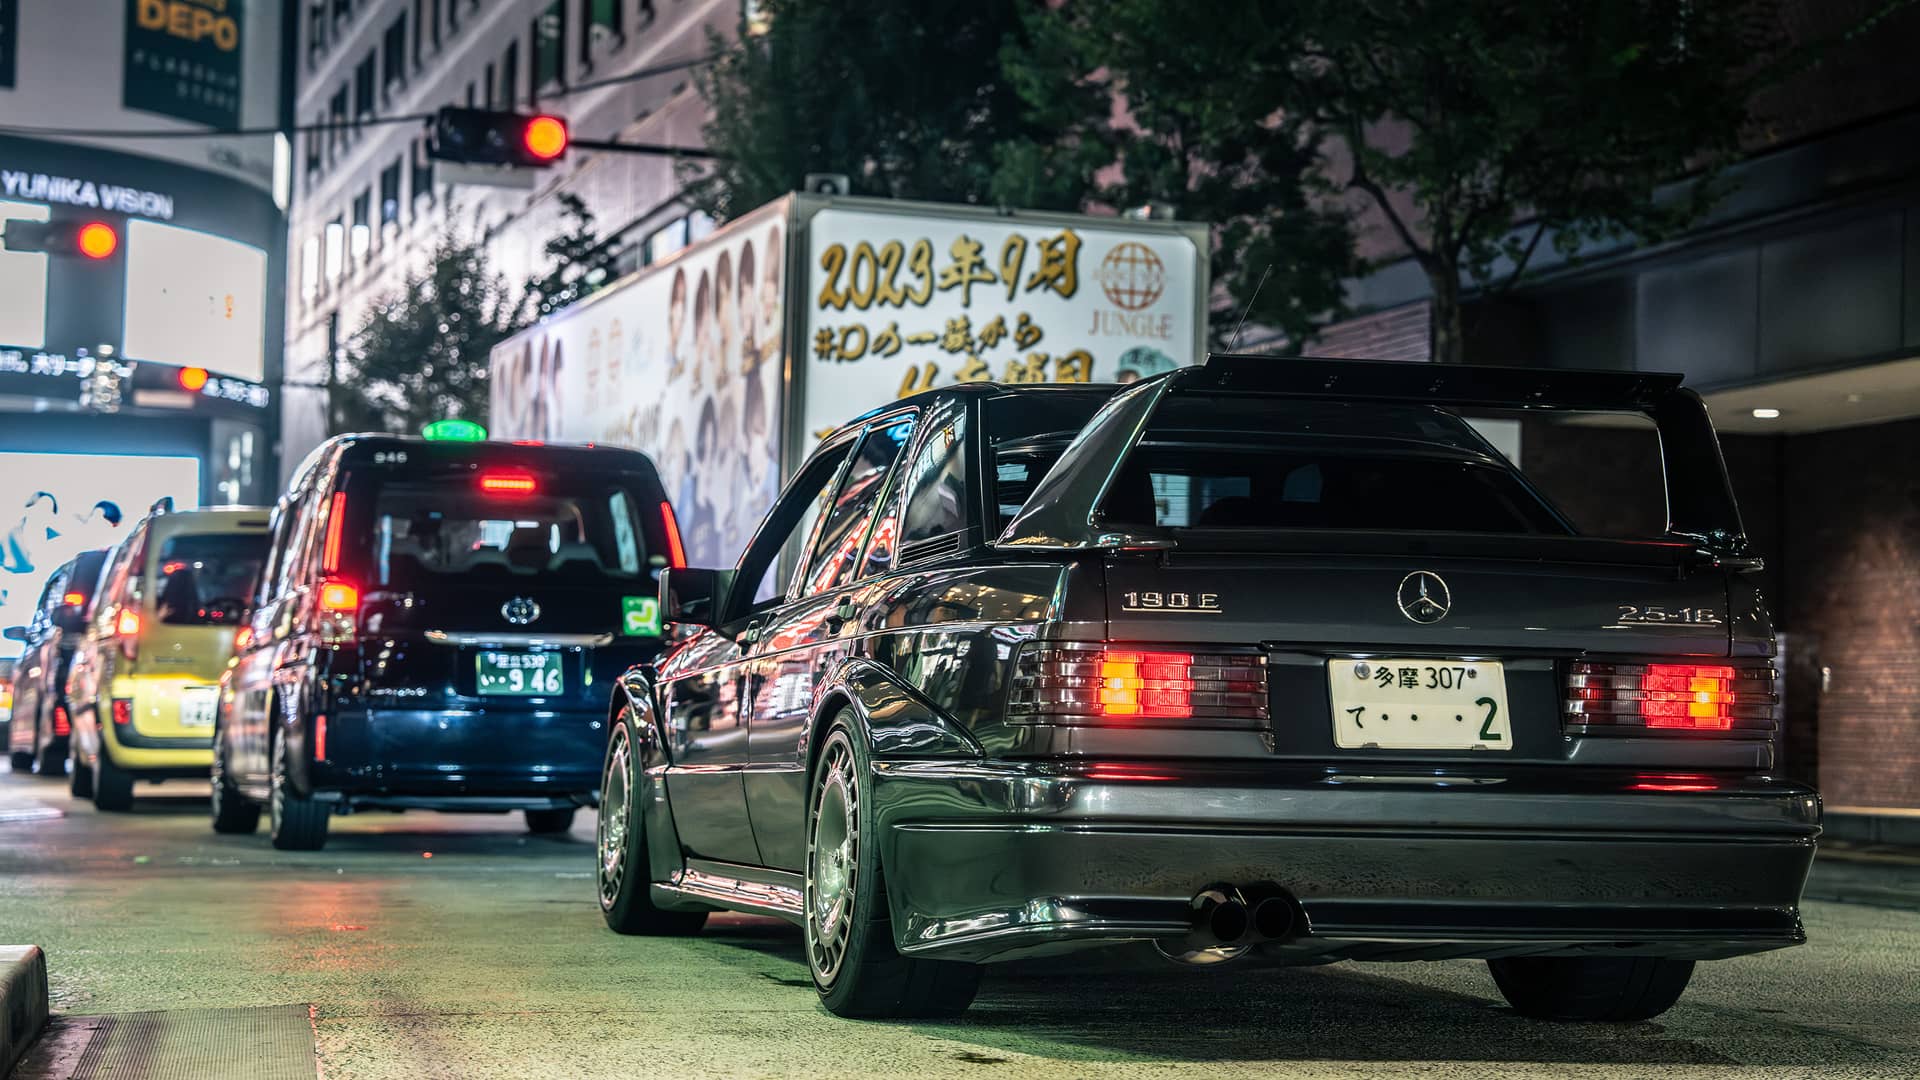 w201, 190e, 2.5-16, 2.3-16, mercedes, amg, mercedes-benz, cosworth, singapore, tokyo, daimler, amg, mercedes-benz, mercedes, motorsports, mercedes-amg, one night in tokyo with mick schumacher and a mercedes w201 190e evo ii